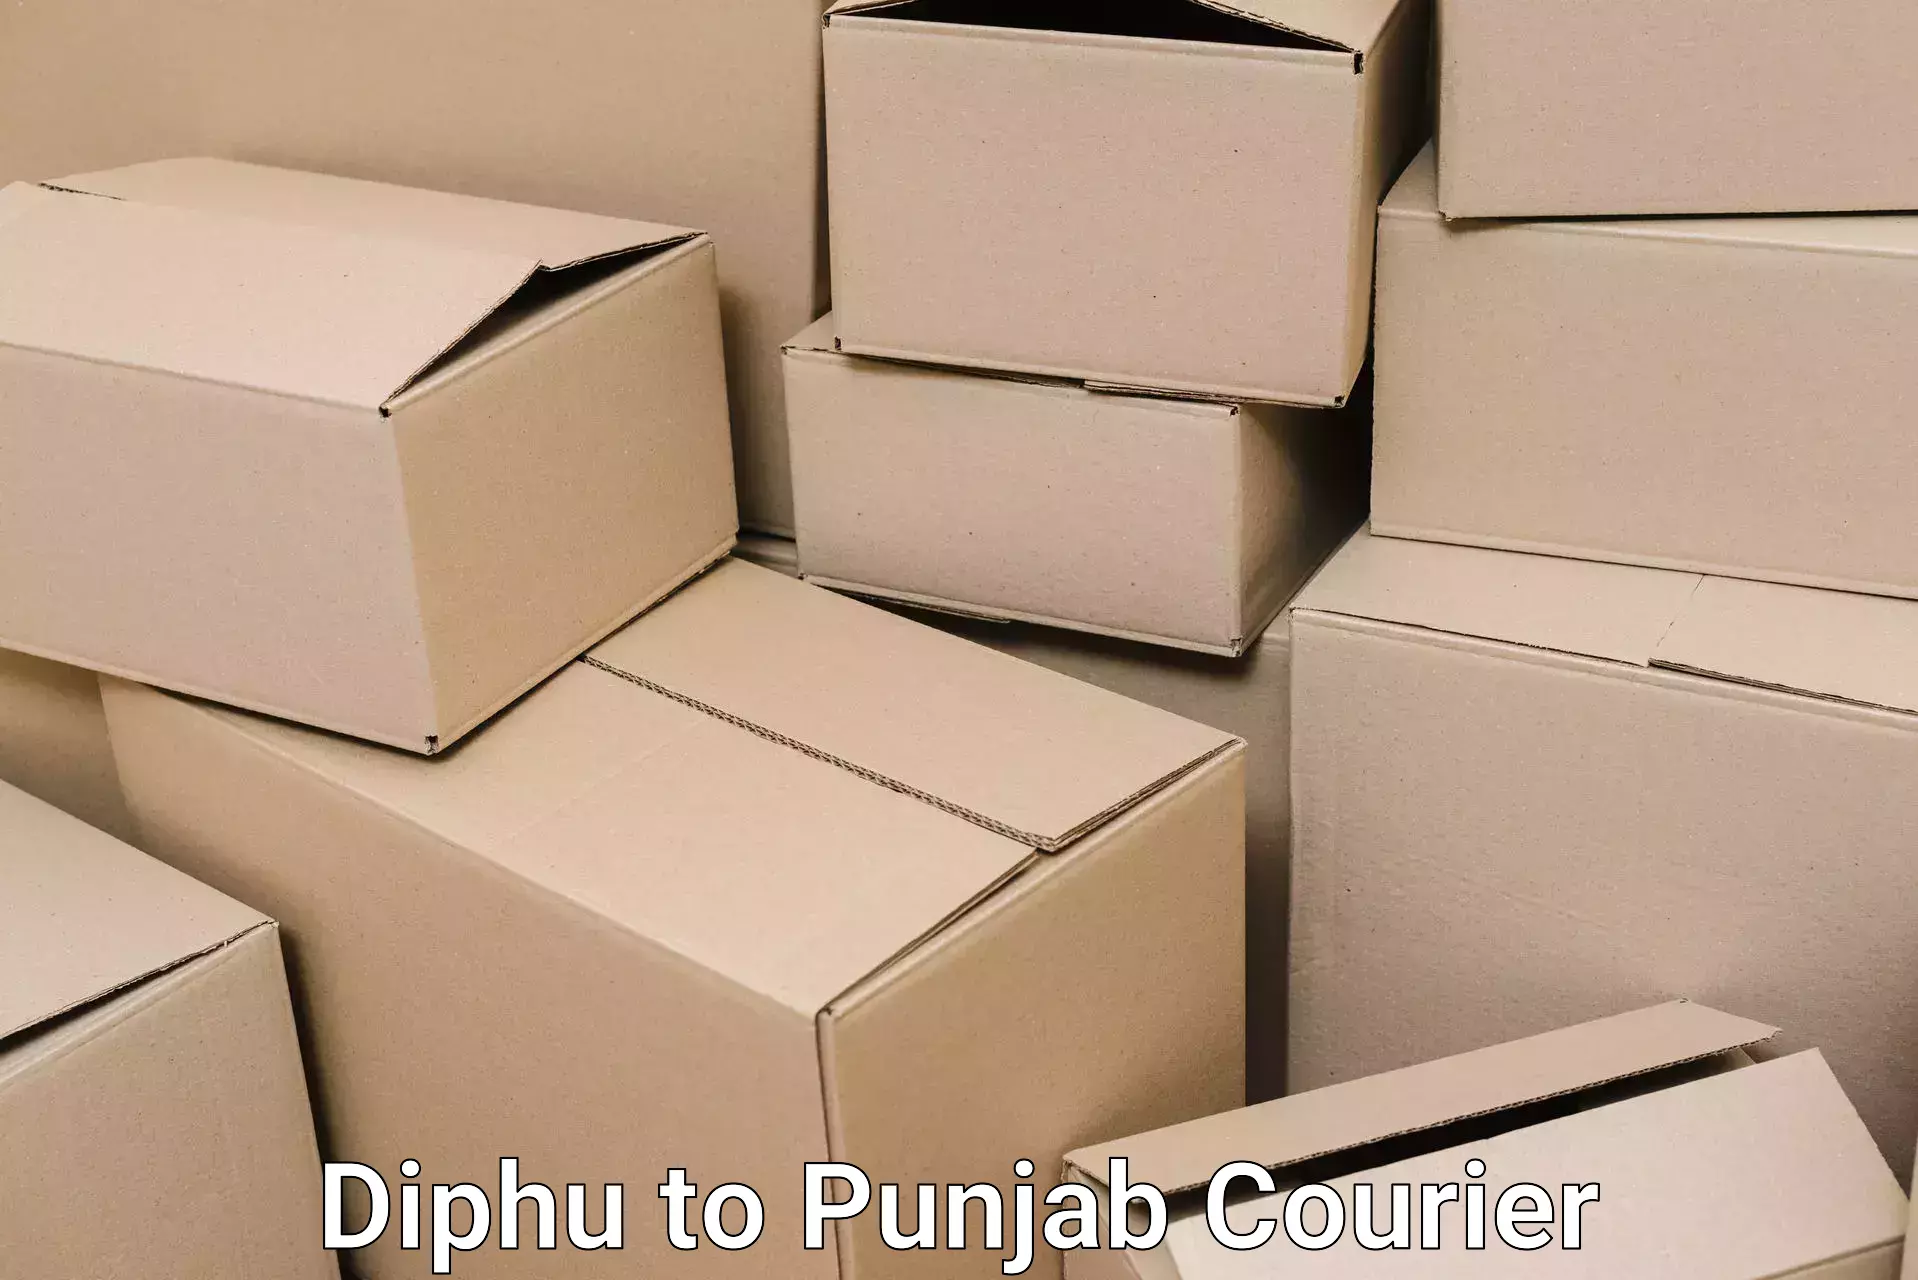 Home relocation experts Diphu to Punjab